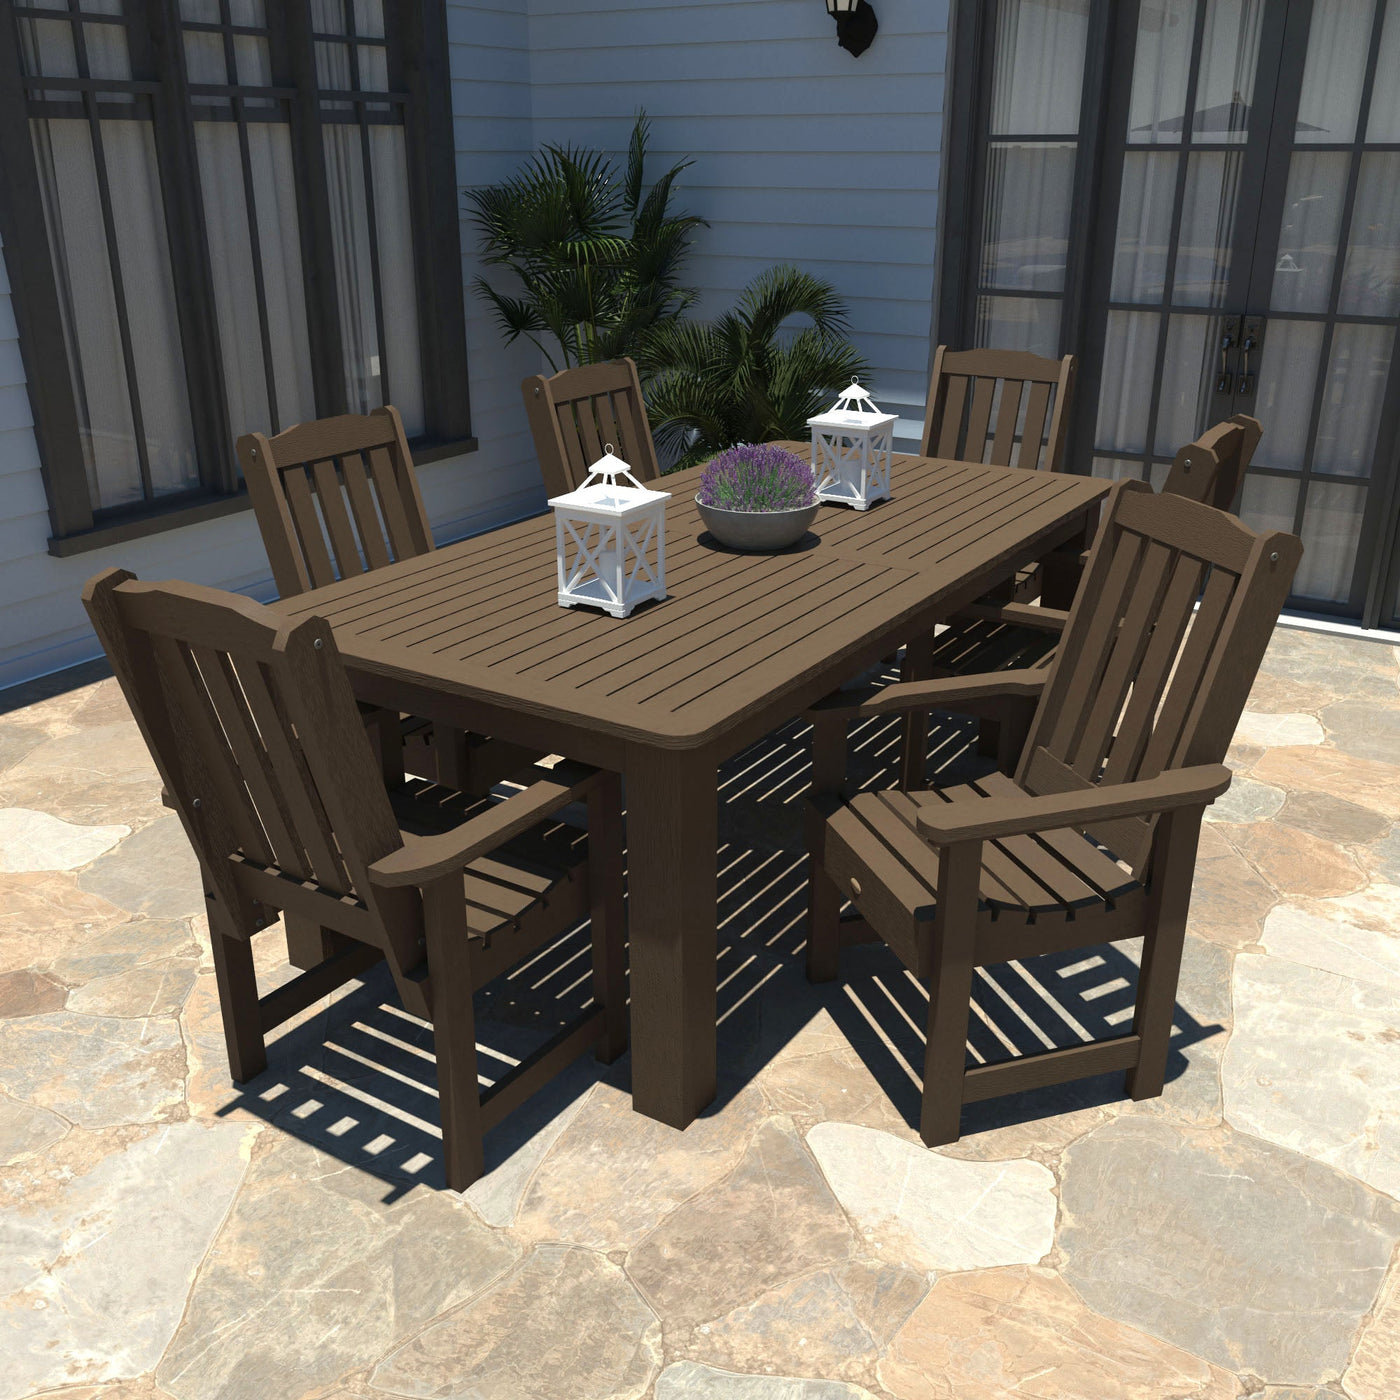 Lehigh 7pc Rectangular Outdoor Dining Set 42in x 84in - Dining Height Dining Highwood USA 